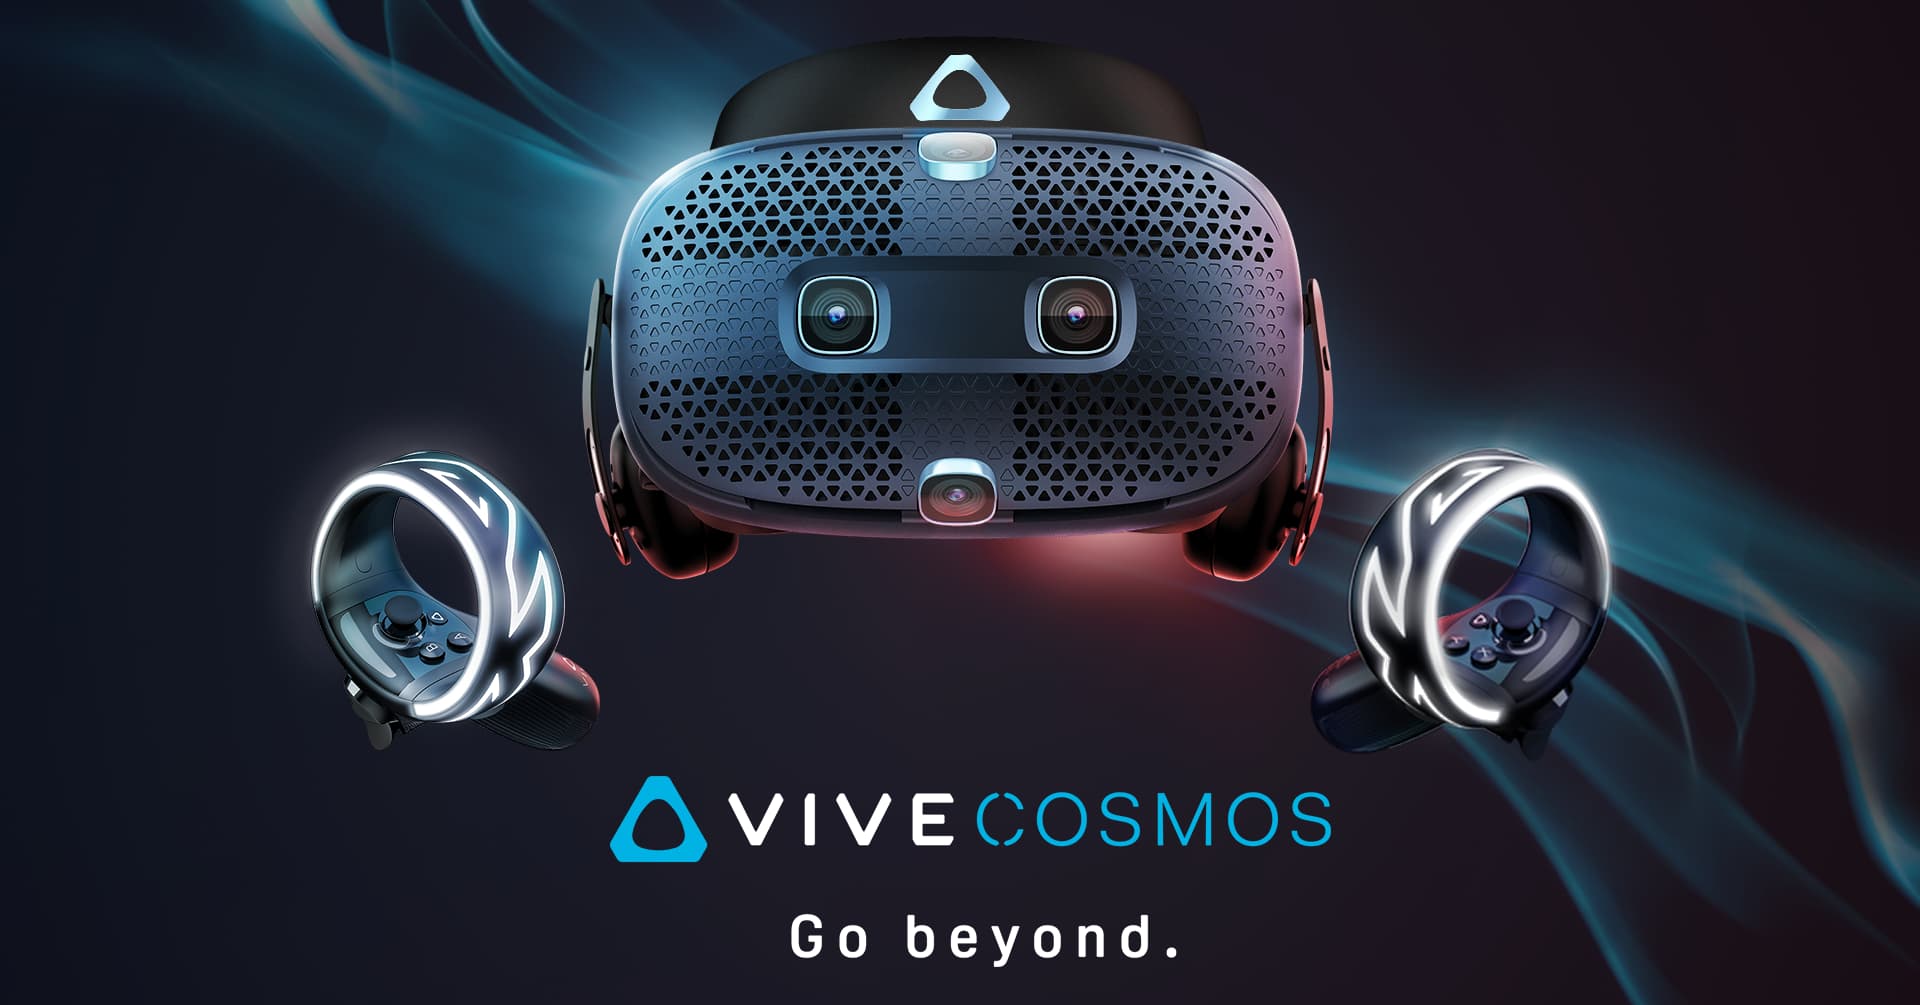 Vive Cosmos Review: A Good VR Headset With Stiff Competition